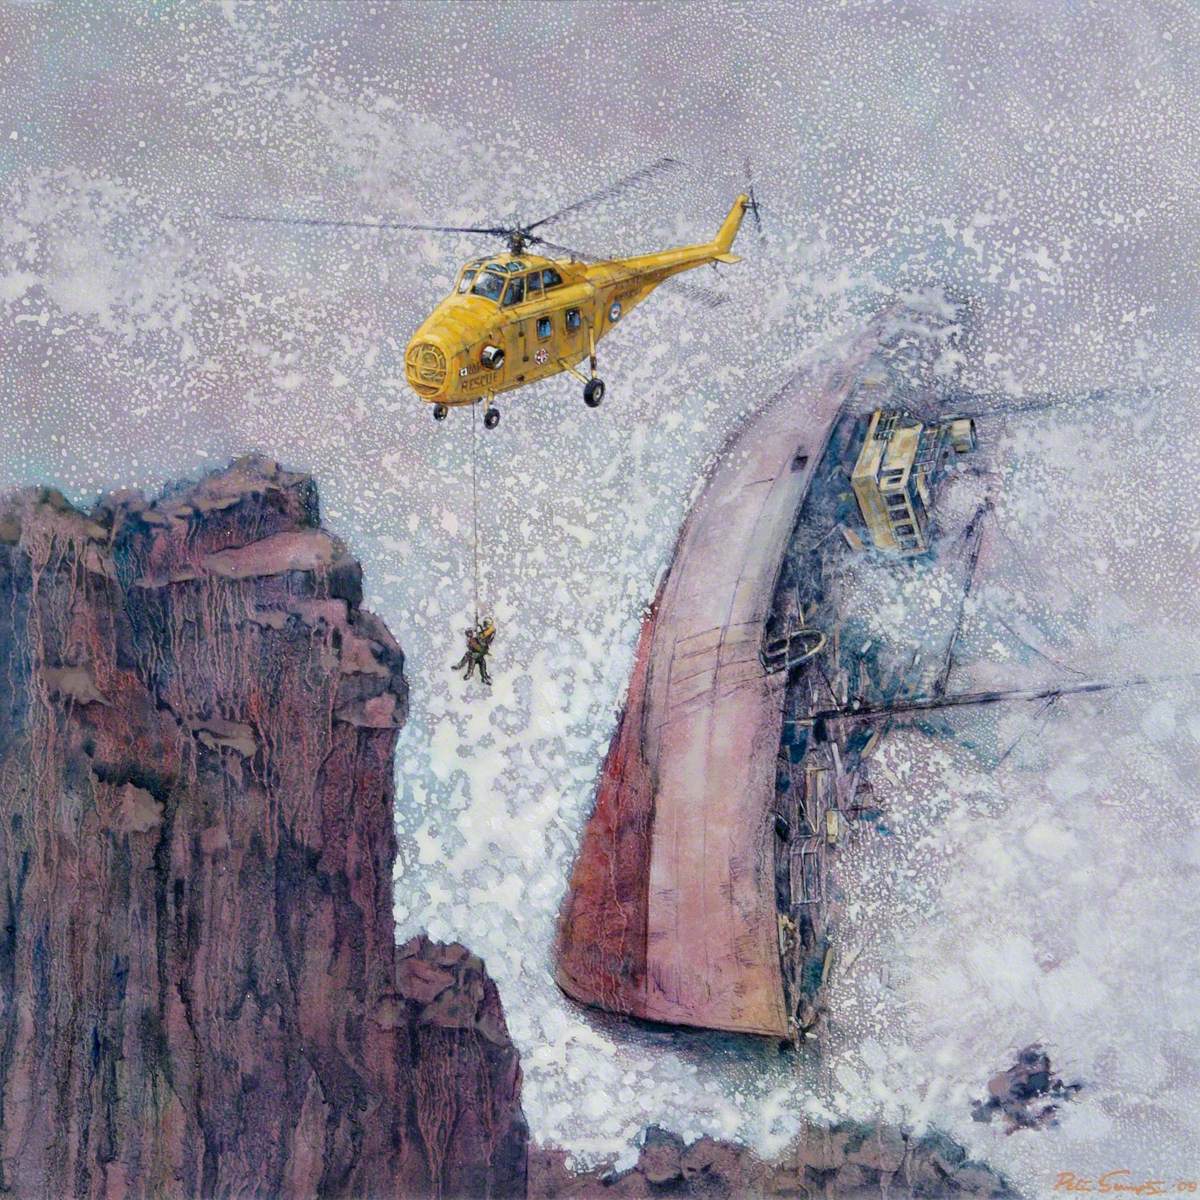 Westland Whirlwind on Air Sea Rescue Duties